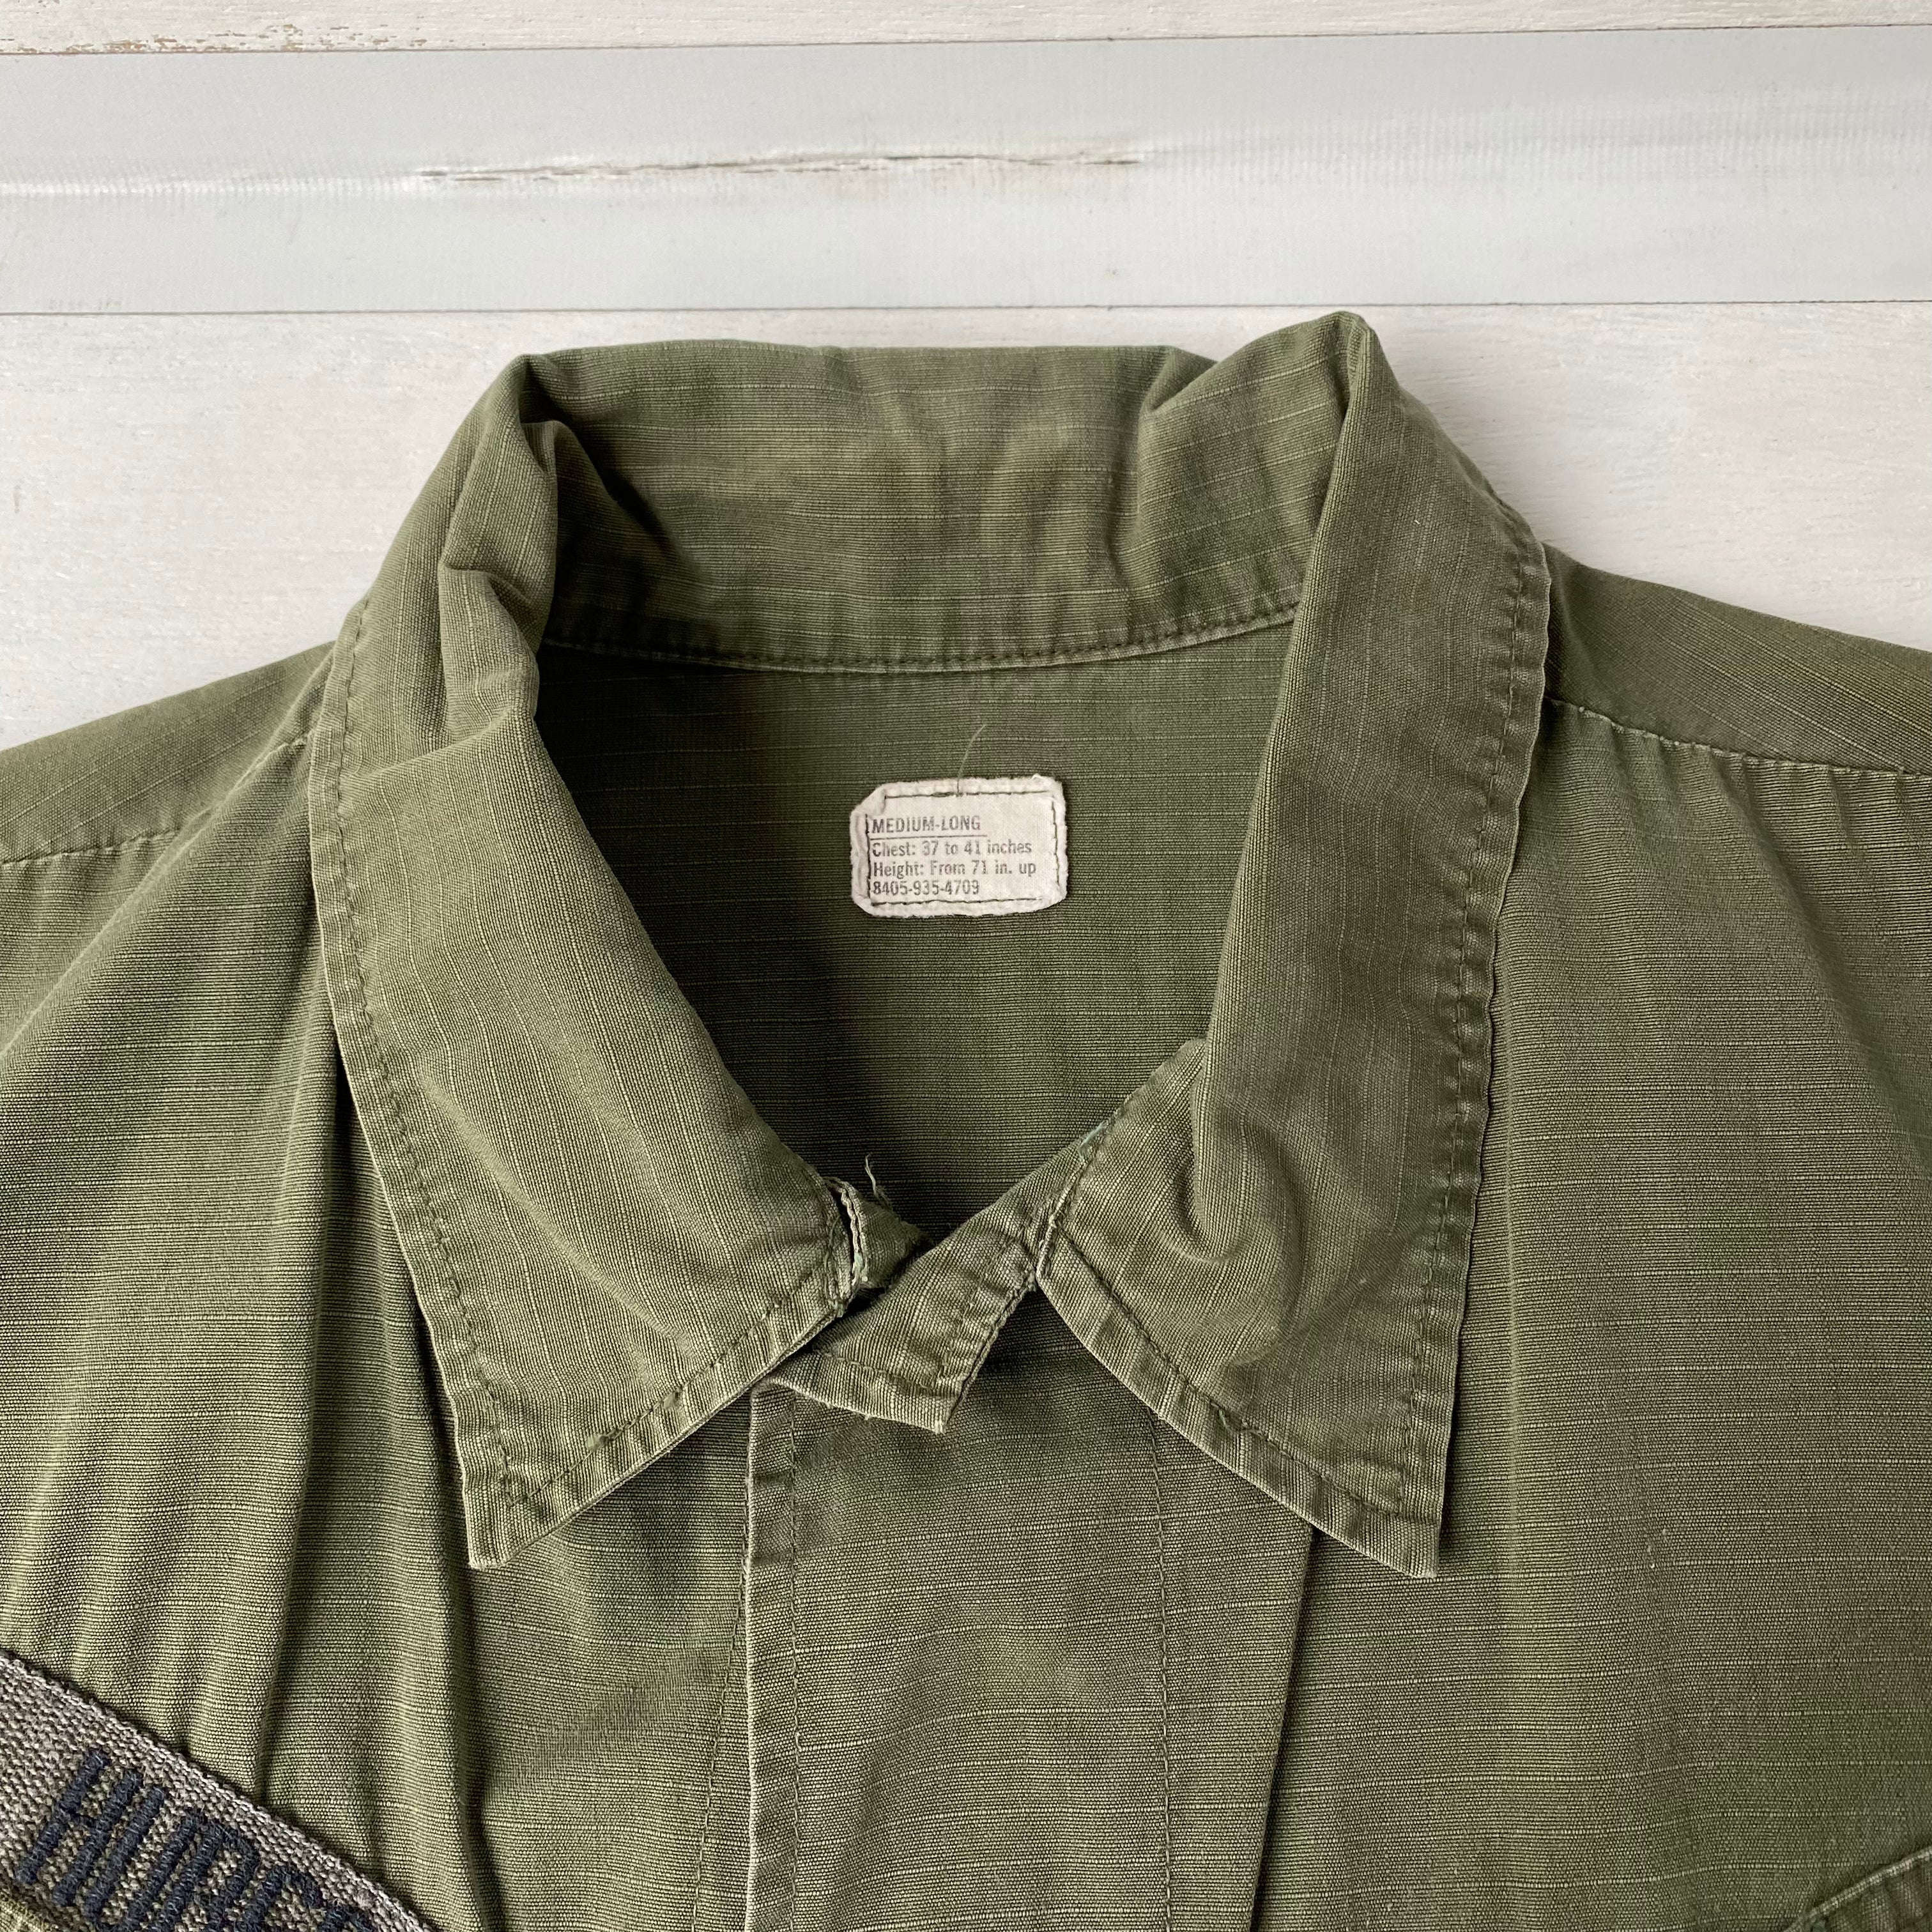 [ ONLY ONE ! ] US ARMED FORCES '69 JUNGLE FATIGUE SHIRT / Mr.Clean Select